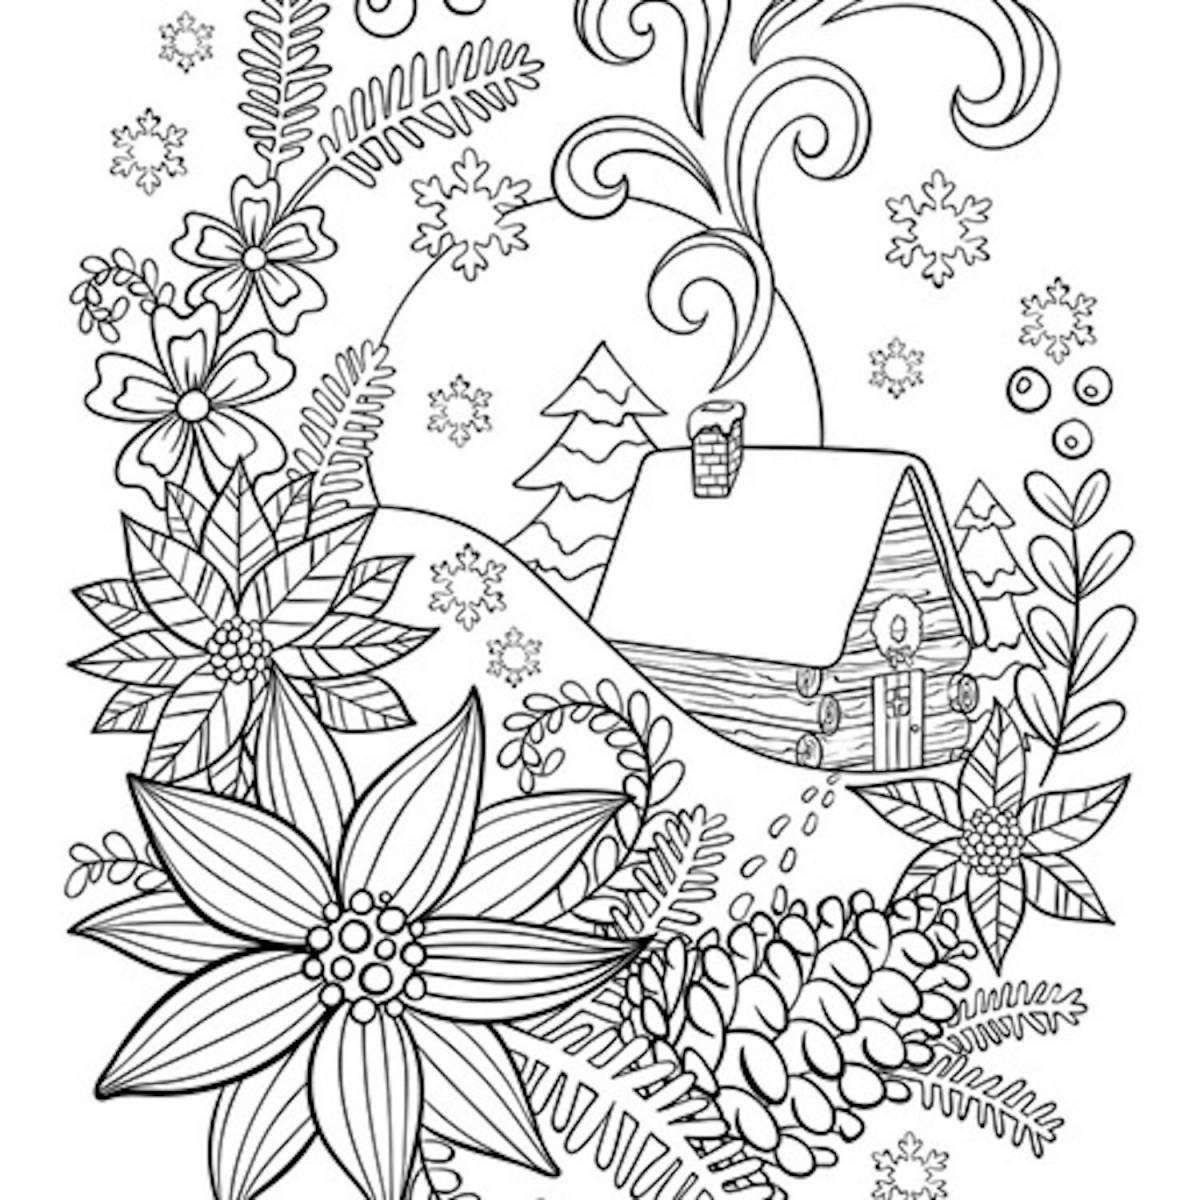 Playful anti-stress winter coloring book for kids